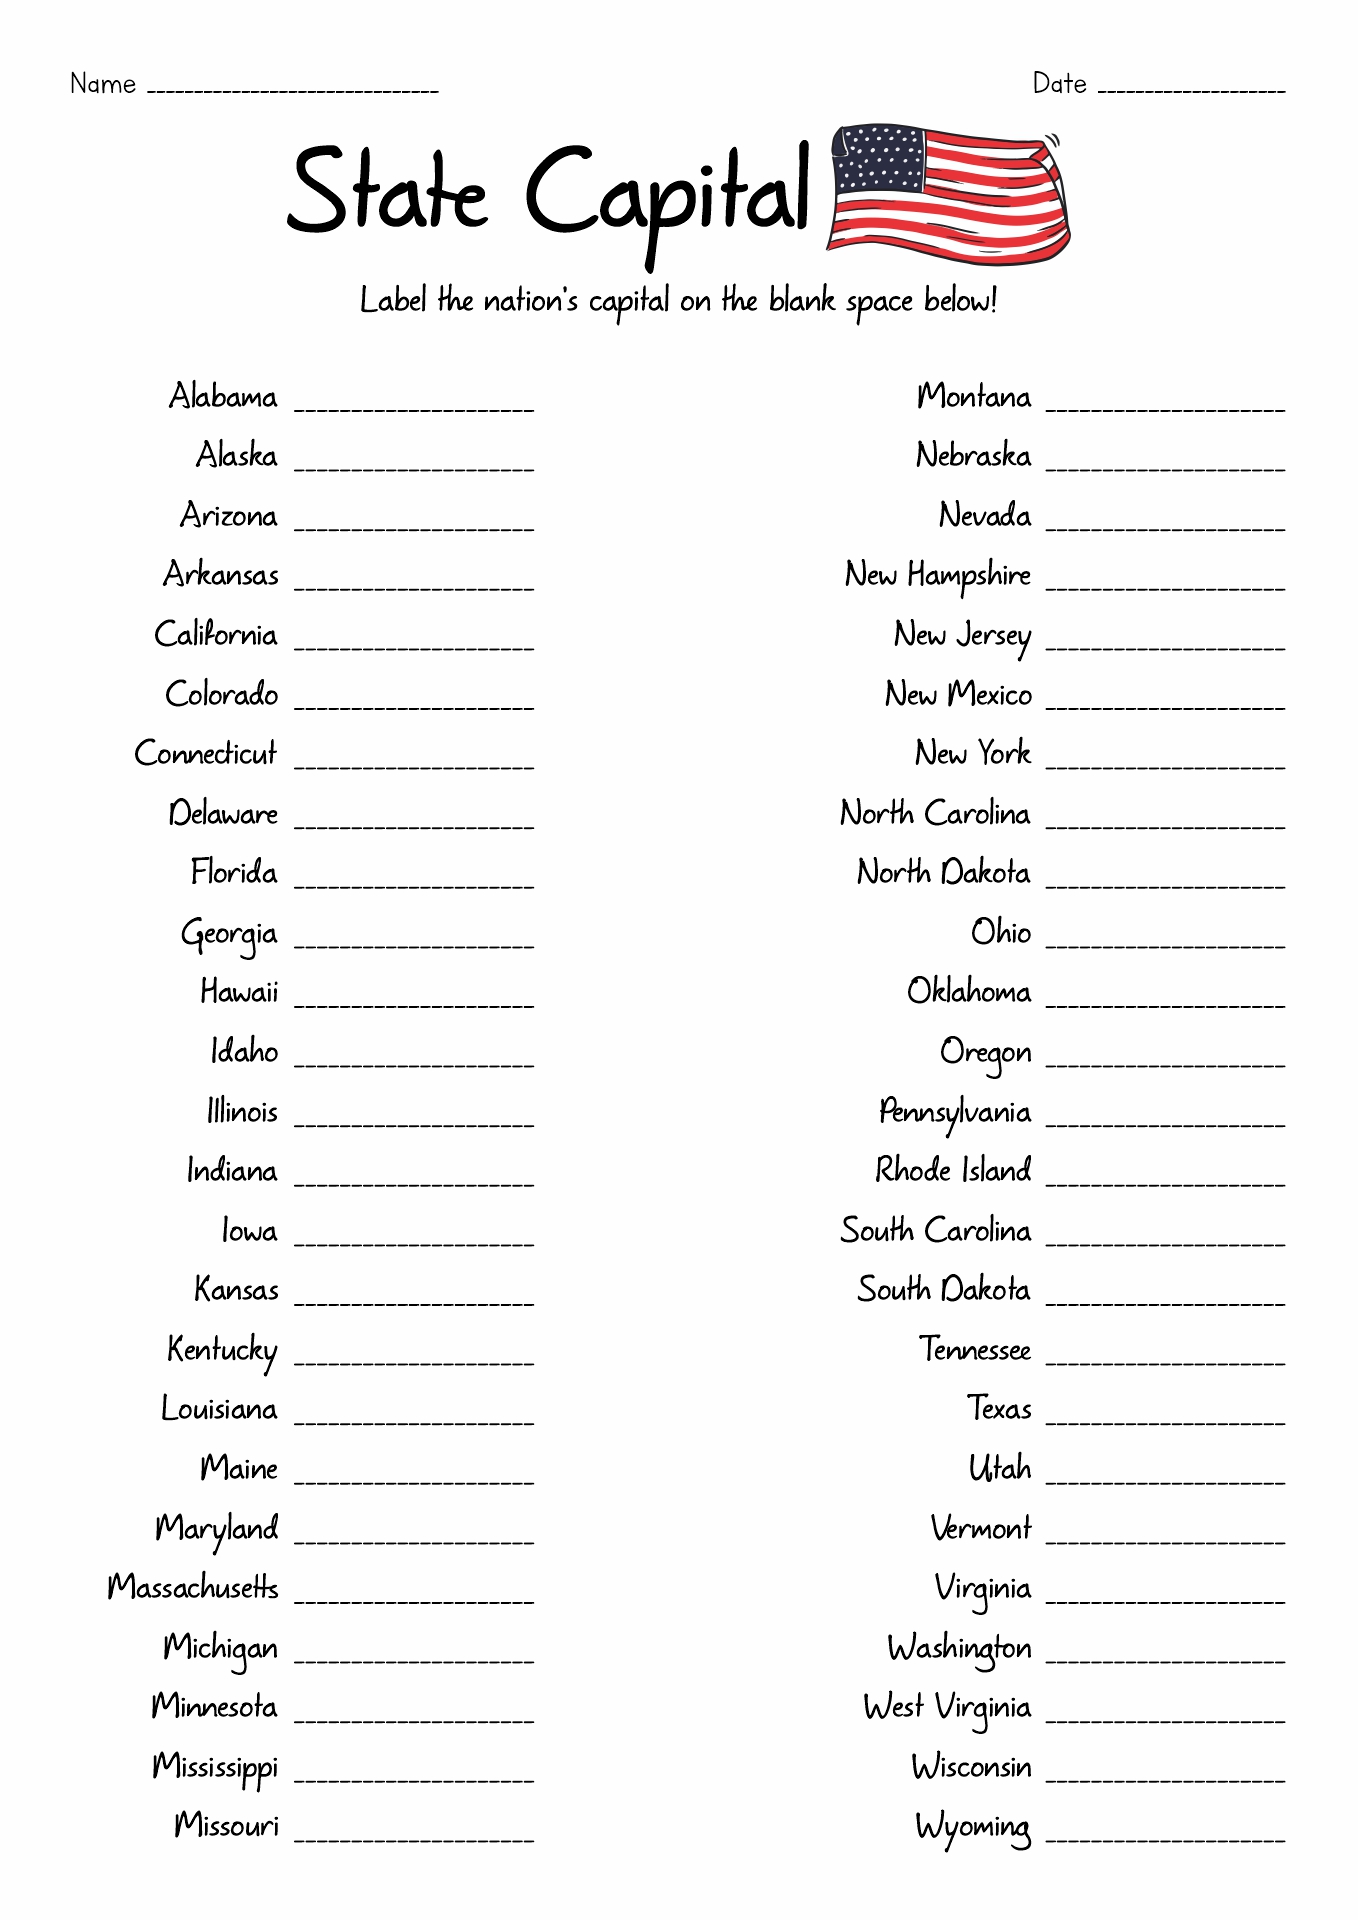 50 States and Capitals Worksheet Image